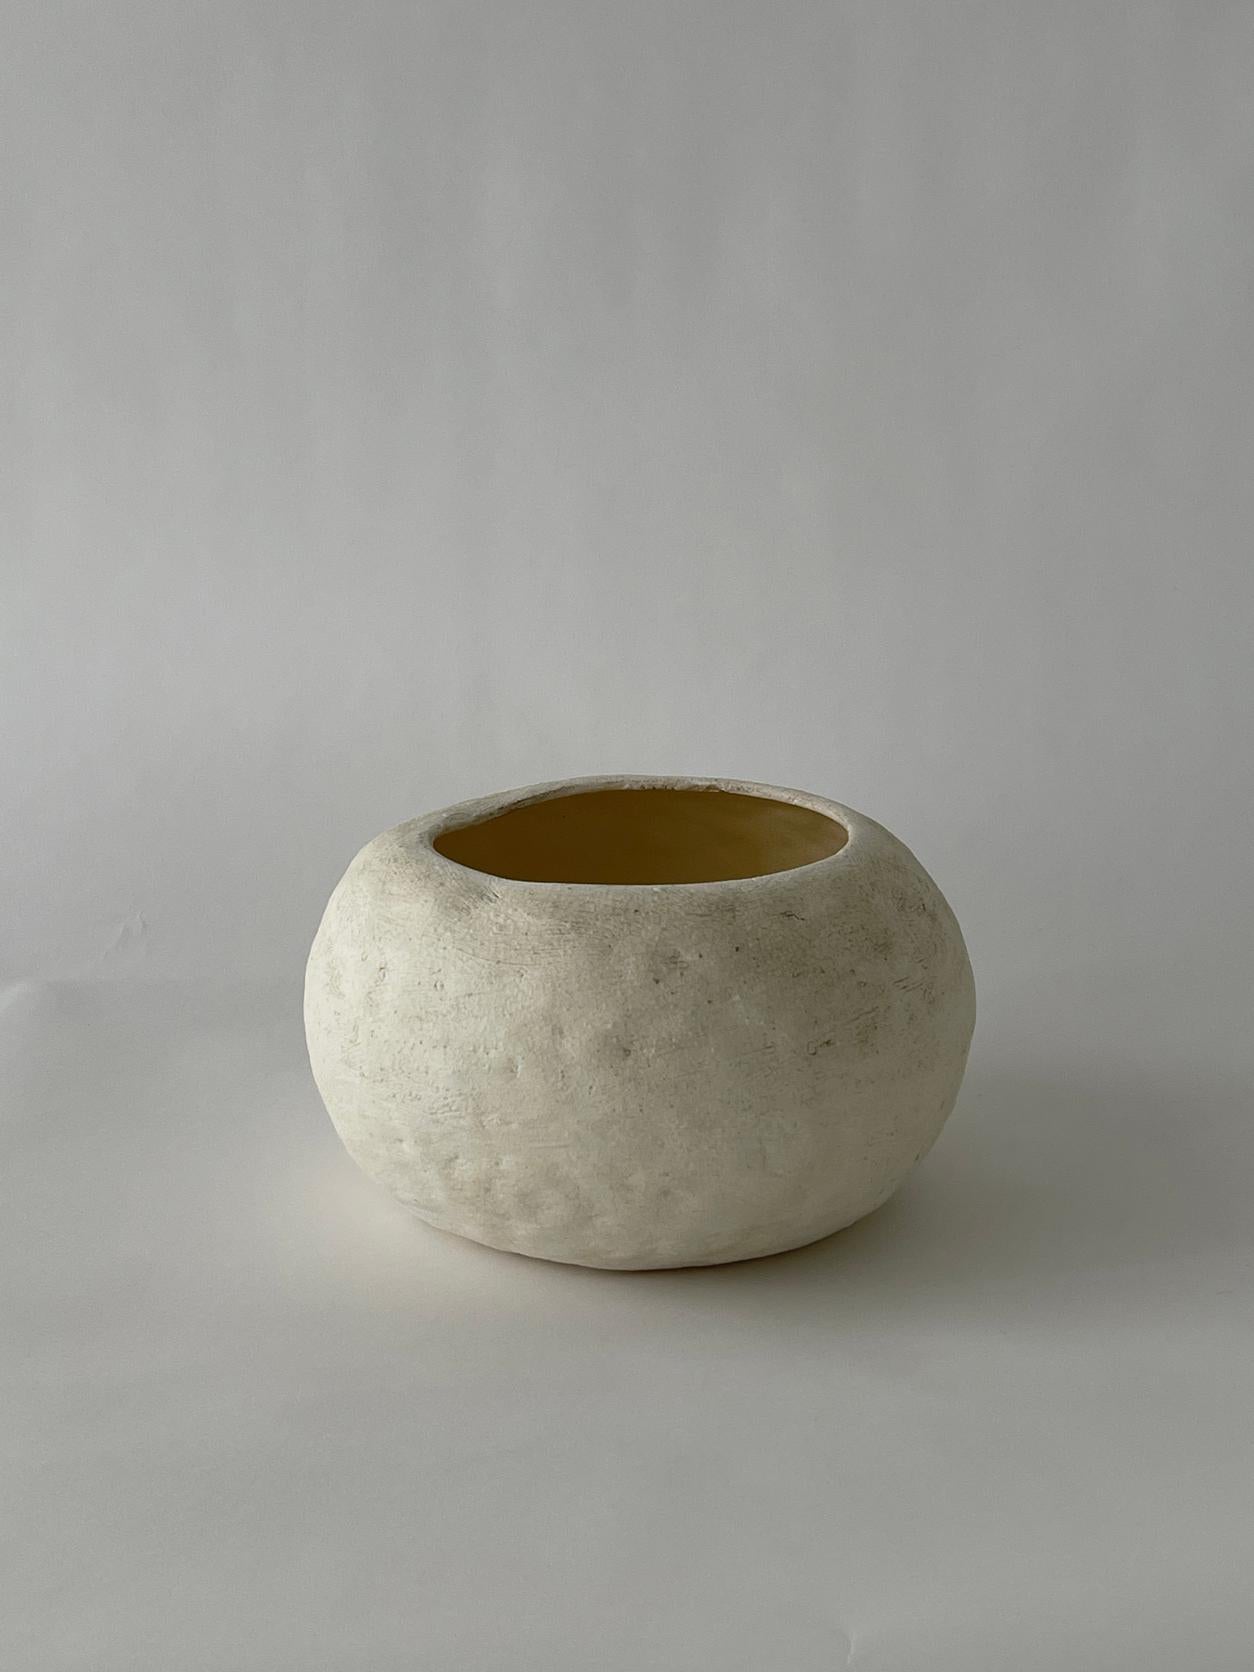 20th century Textured ceramic bowl with a beautiful freeform shape in an off-white color. Perfect for display on any table or shelve.